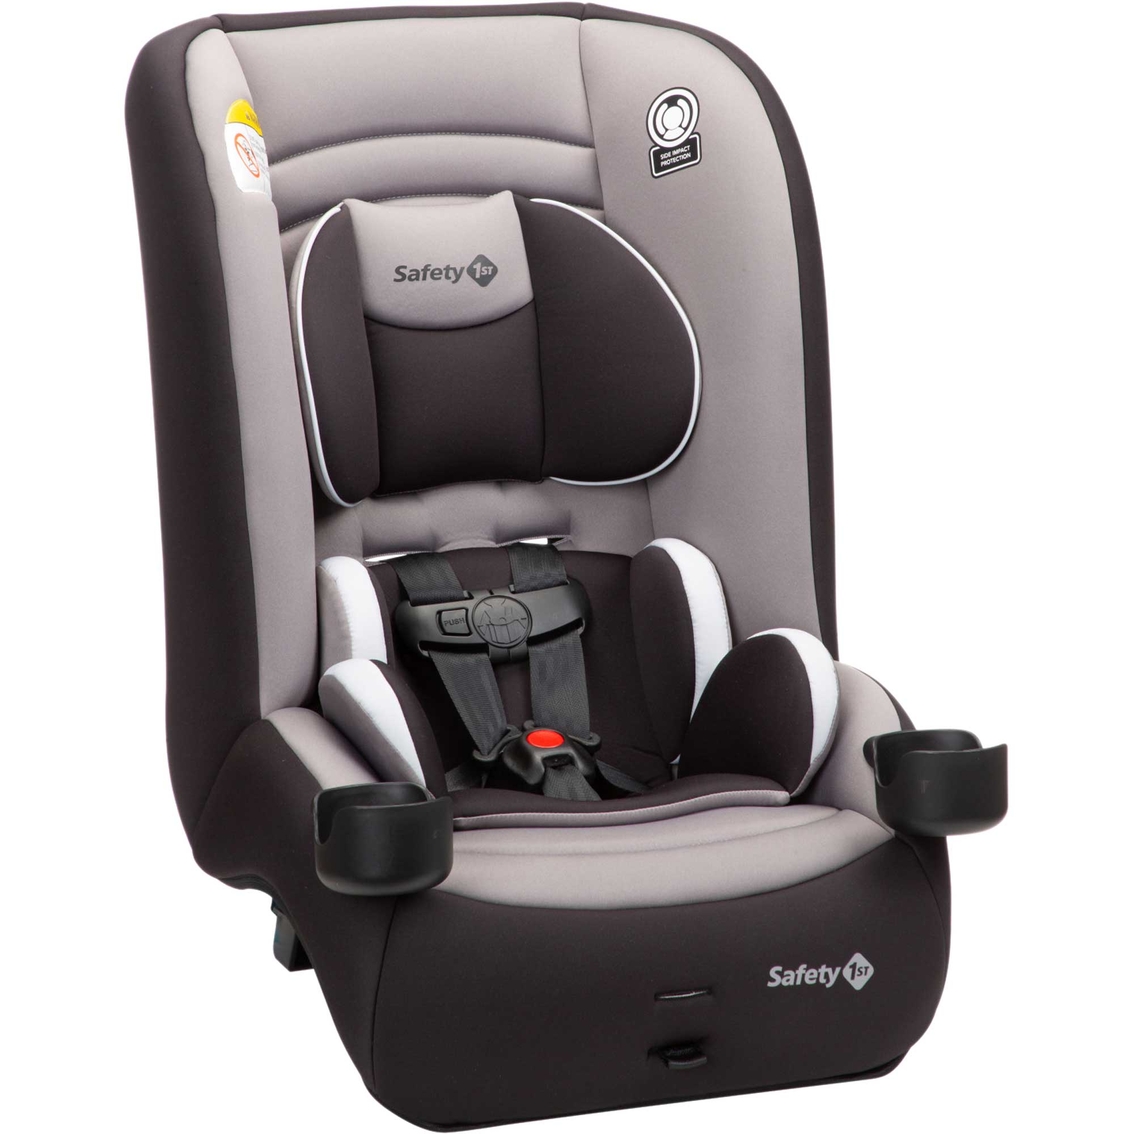 Safety 1st Jive 2-in-1 Convertible Car Seat - Image 3 of 10